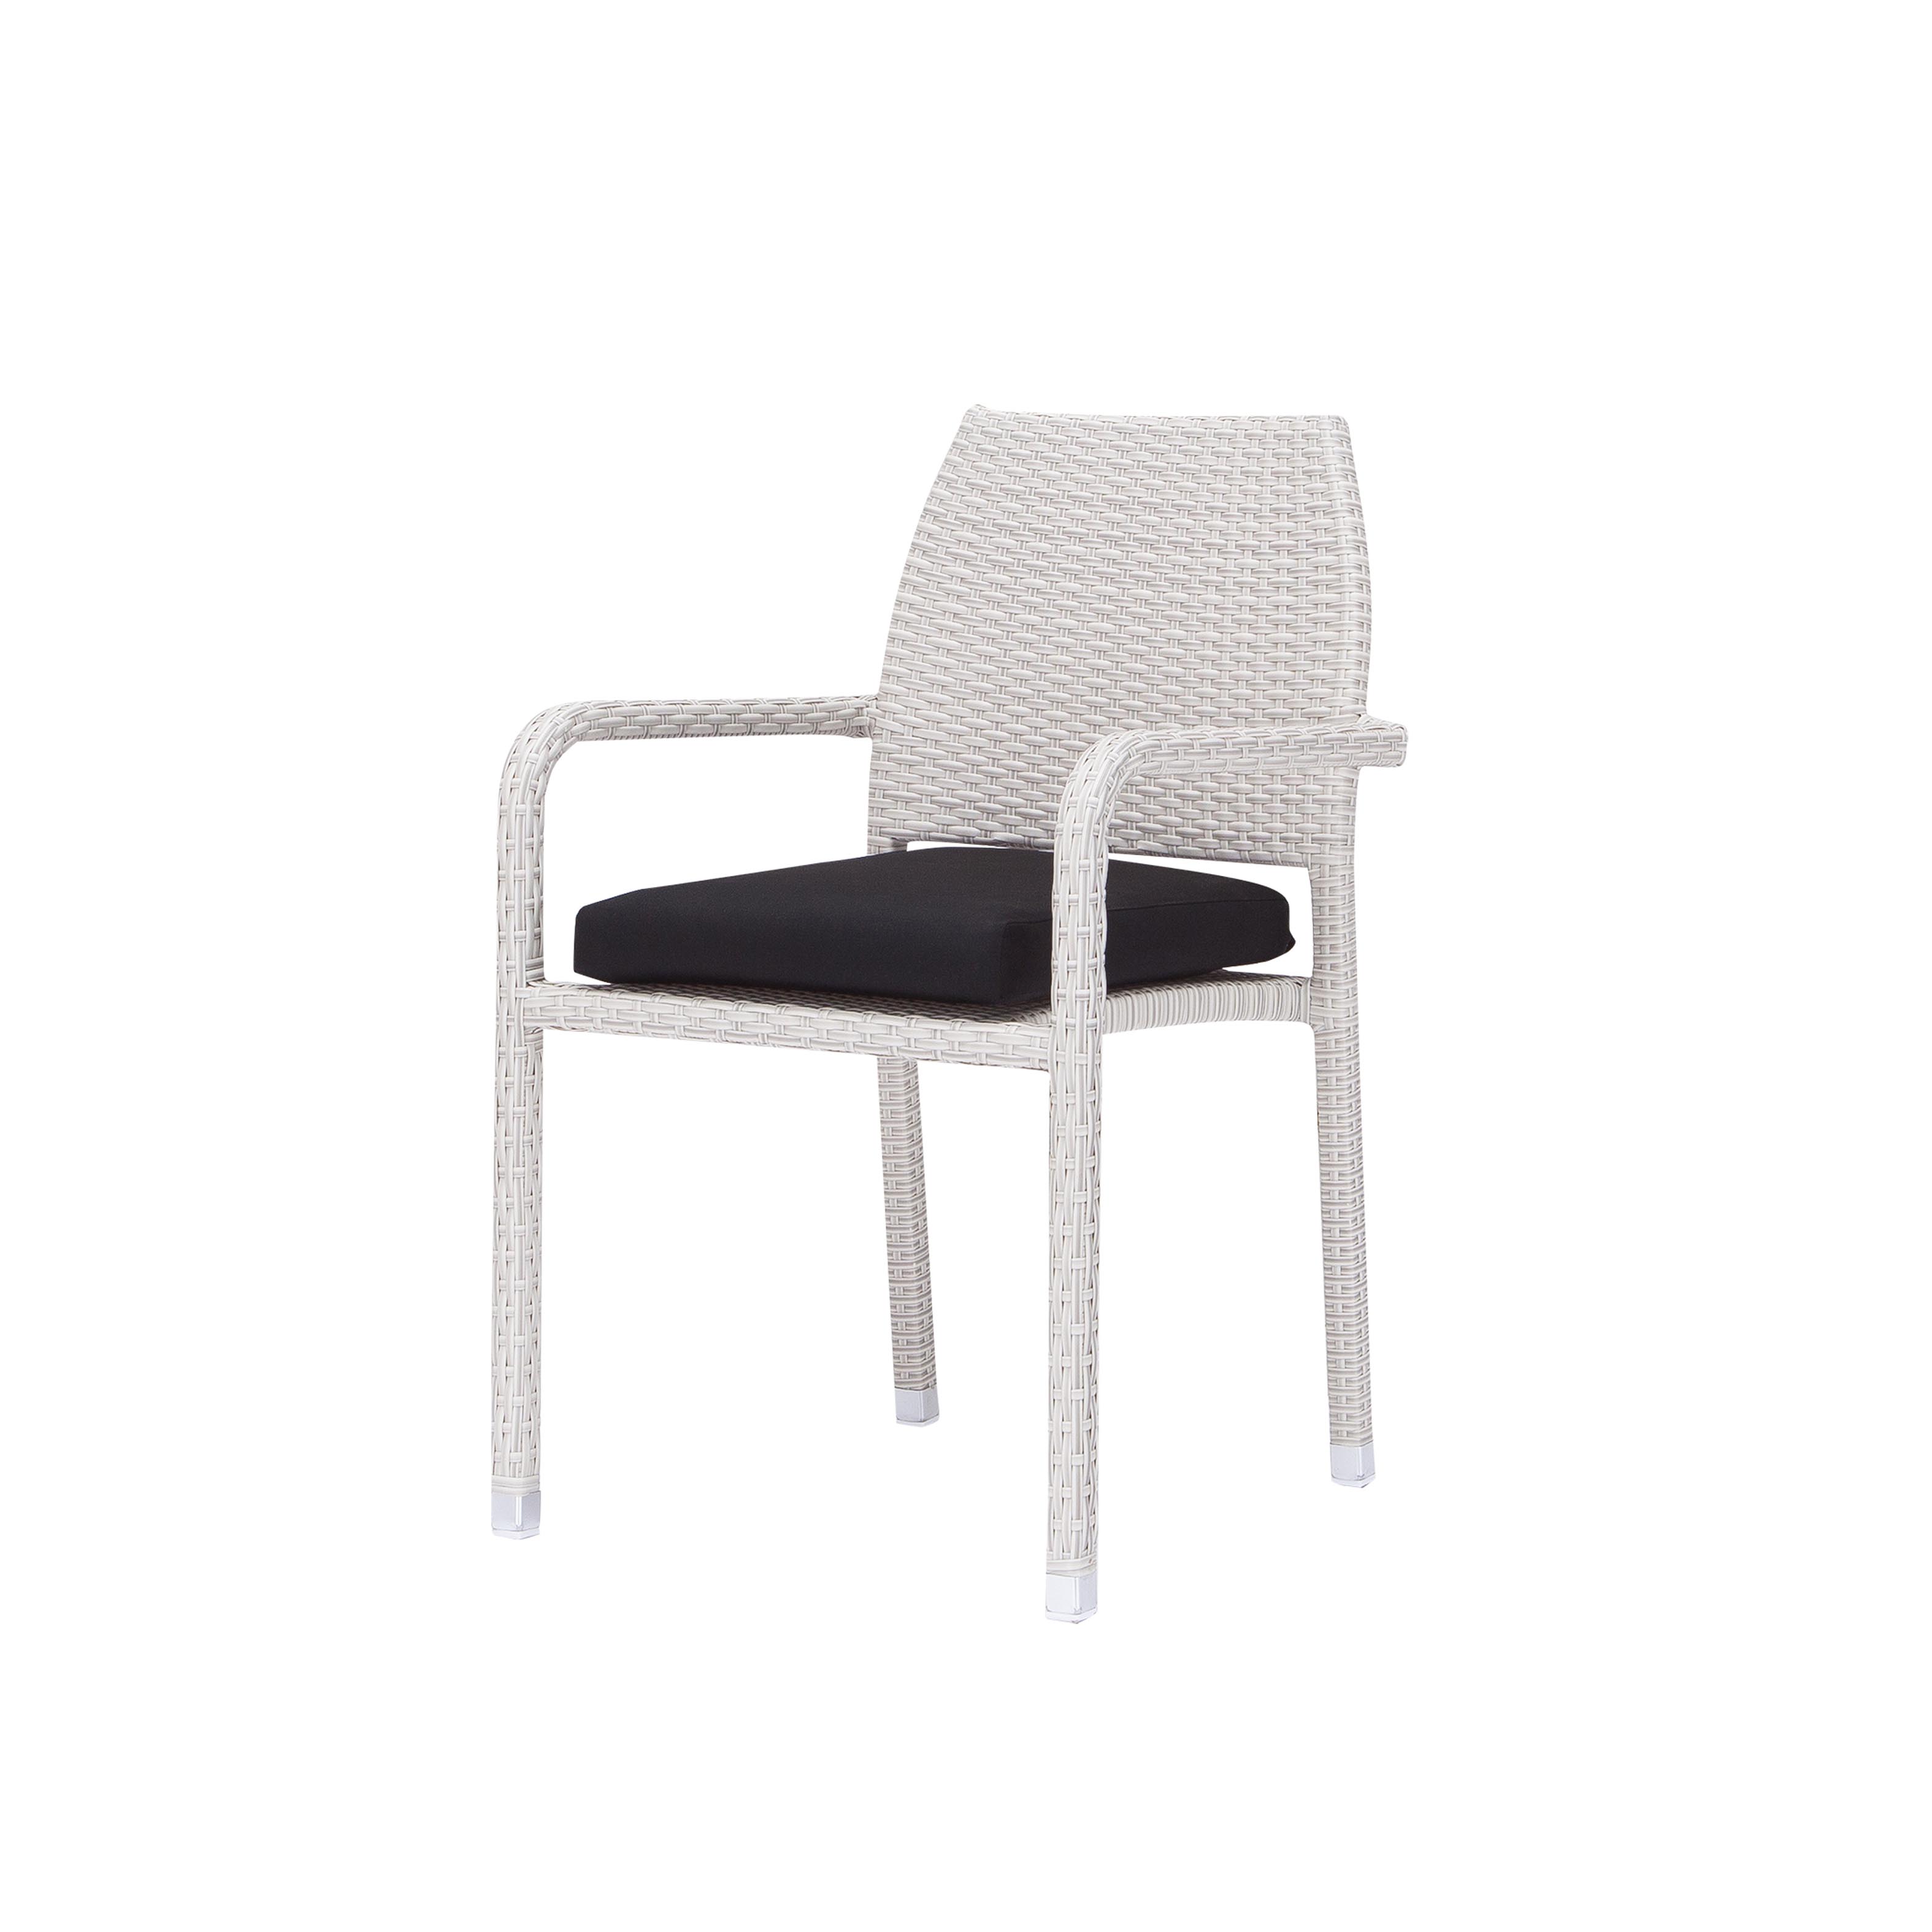 Sunny dining chair S1